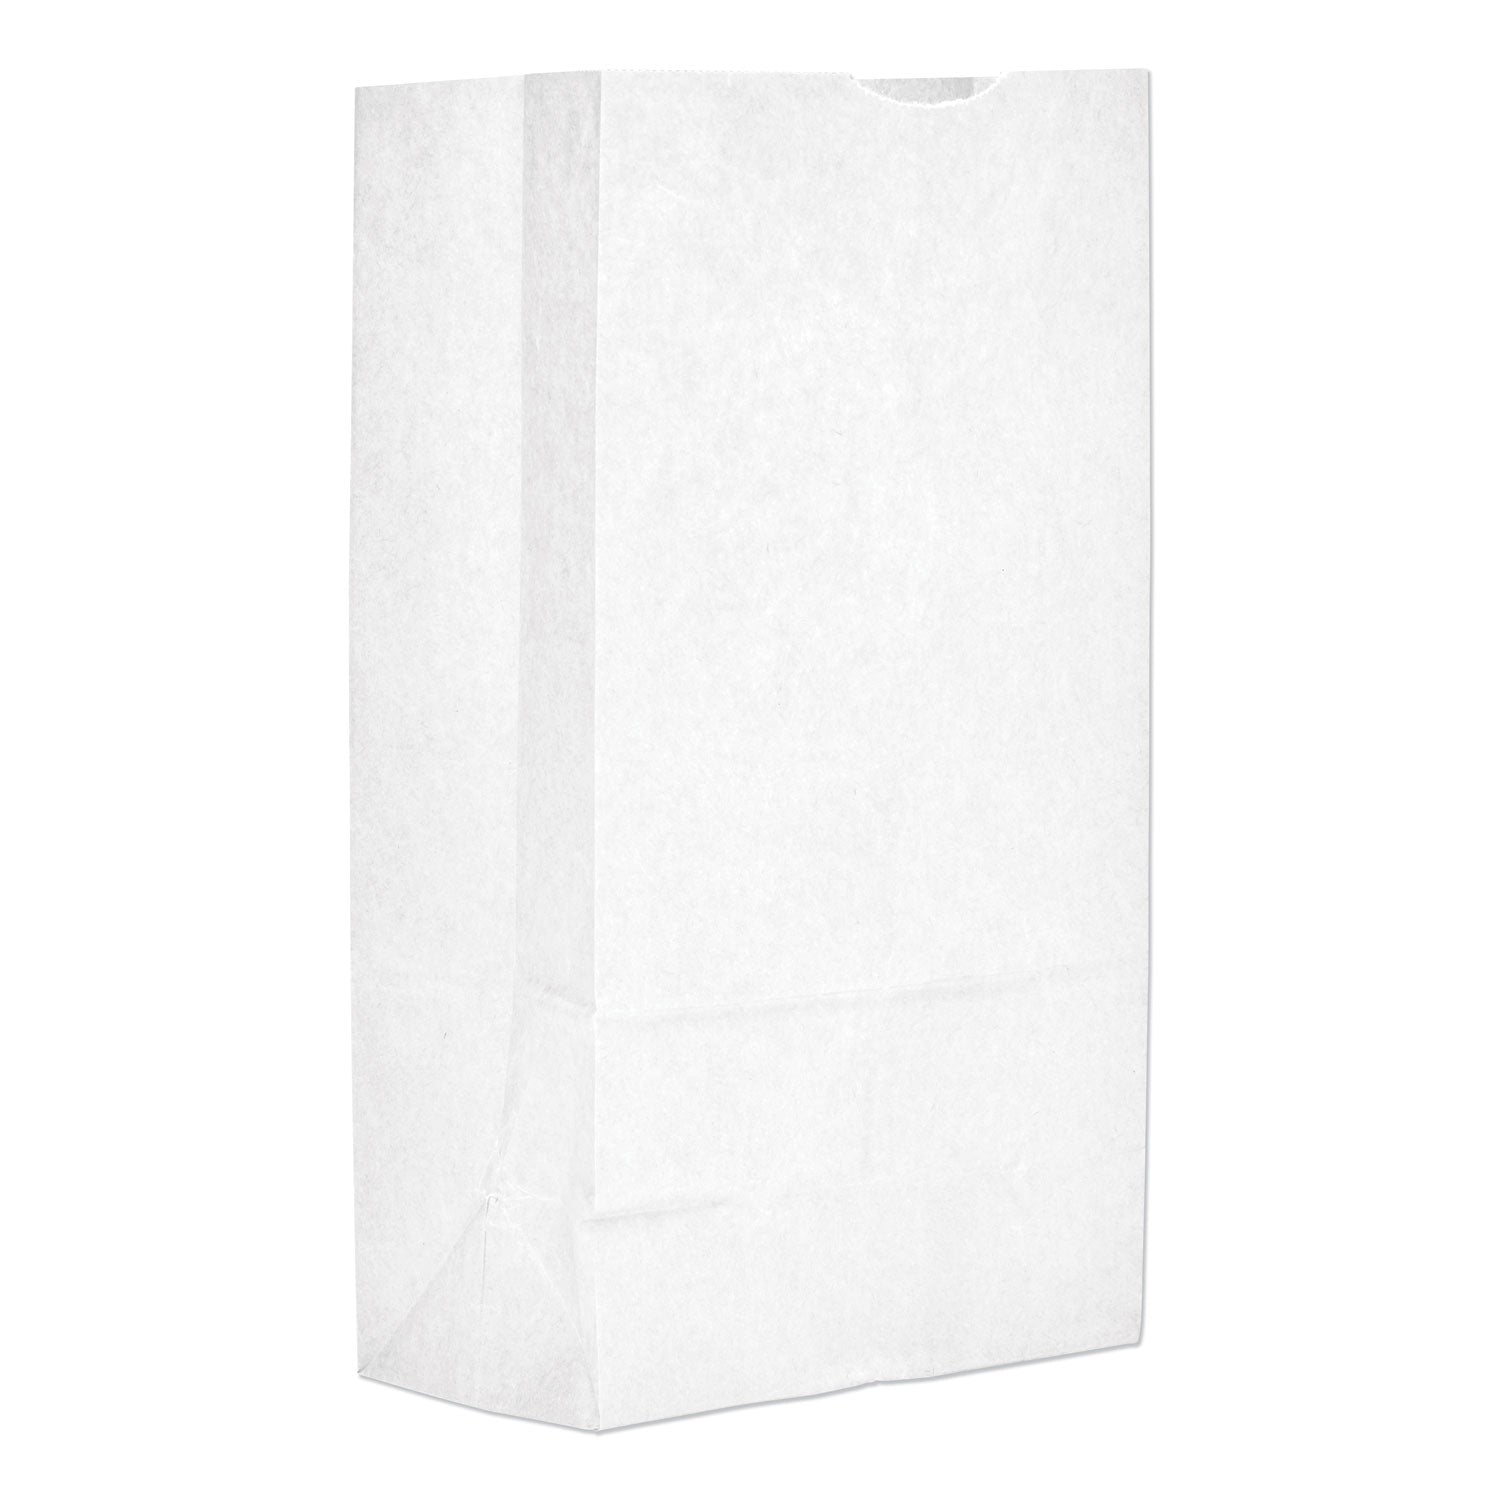 grocery-paper-bags-40-lb-capacity-#12-706-x-45-x-1375-white-500-bags_baggw12500 - 1